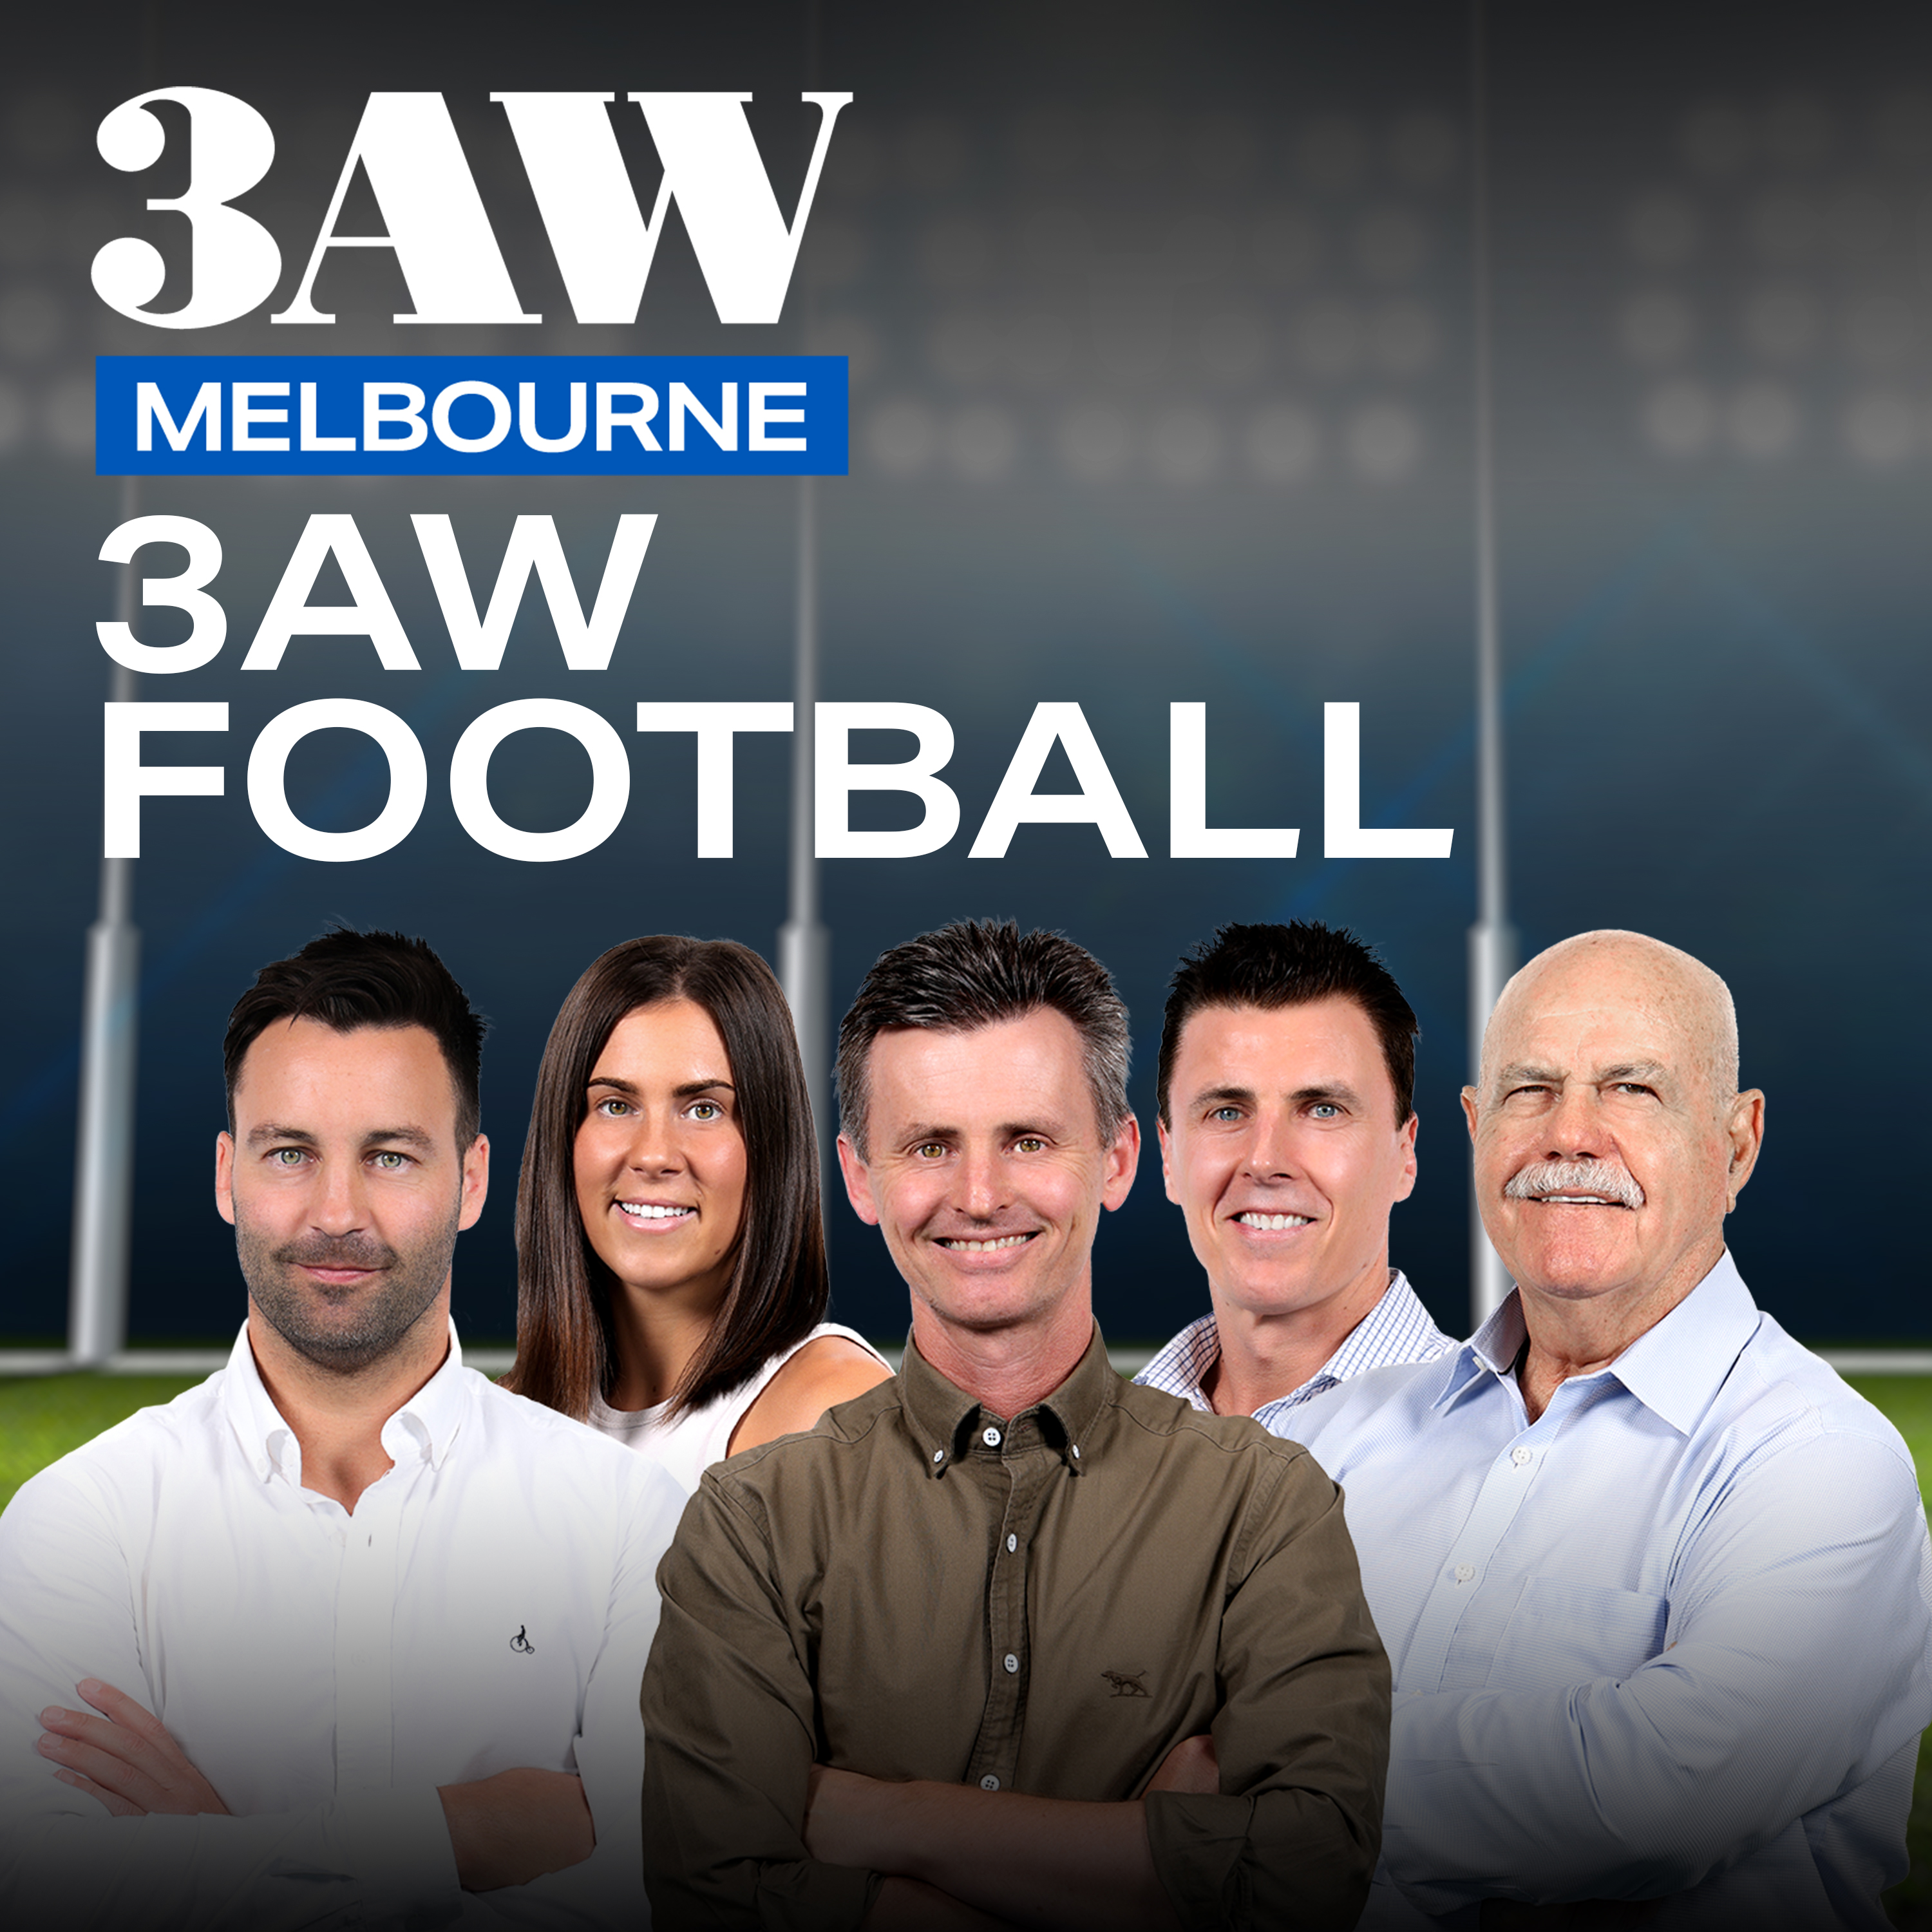 Tigers Football Manager Neil Balme joins the panel on 3AW Football